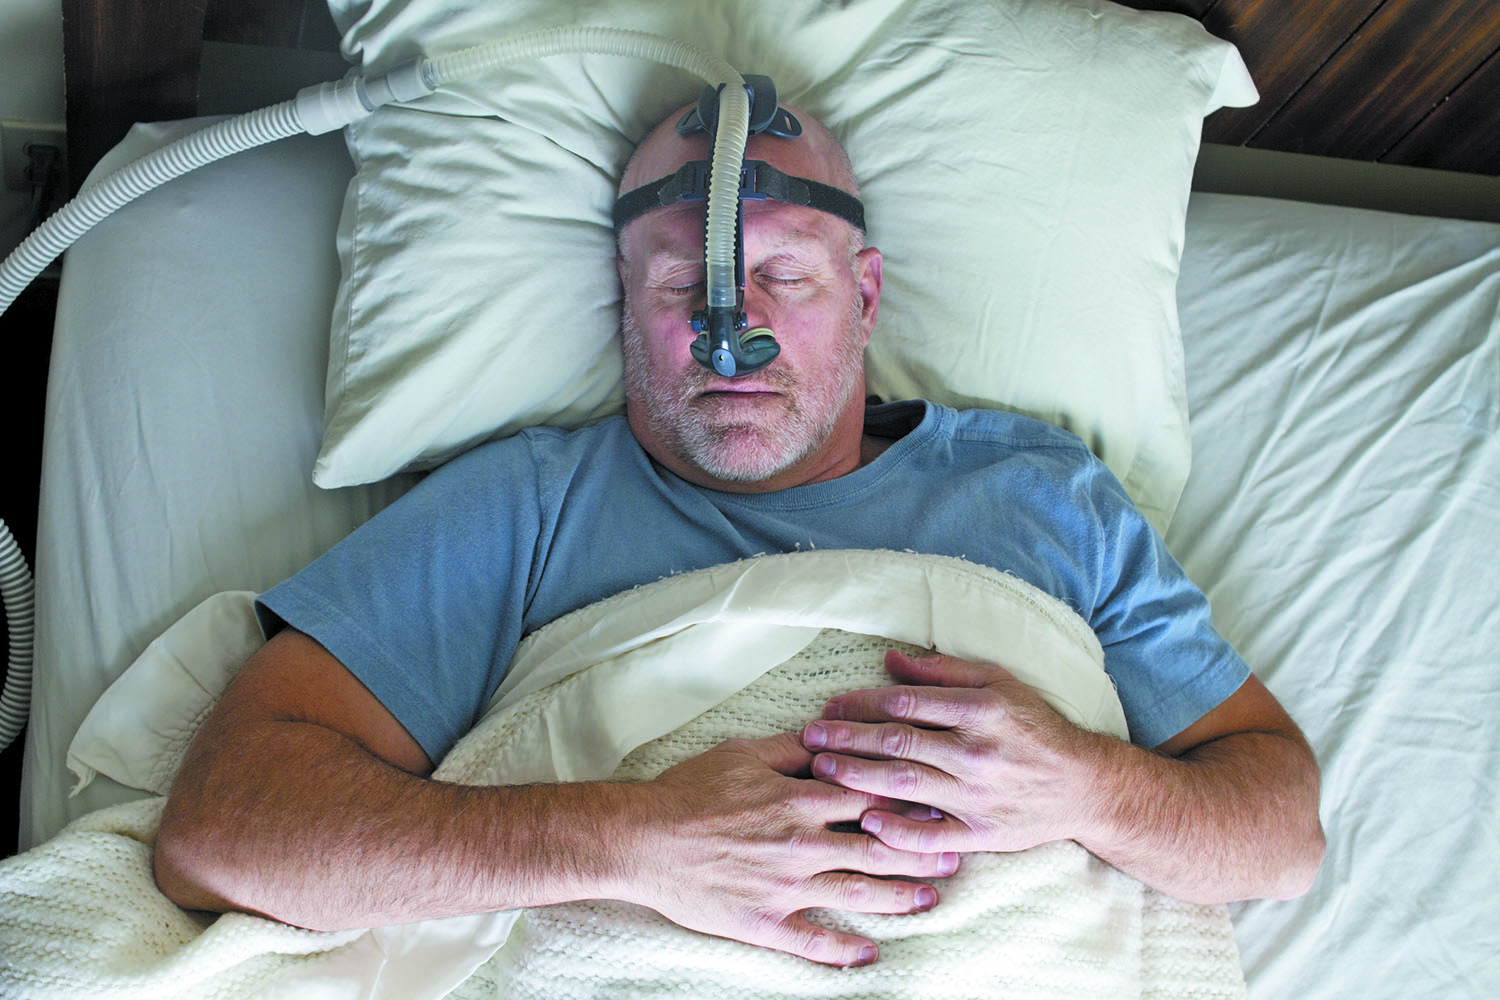 Essential things you need to know about cpap machines for sleep apnea